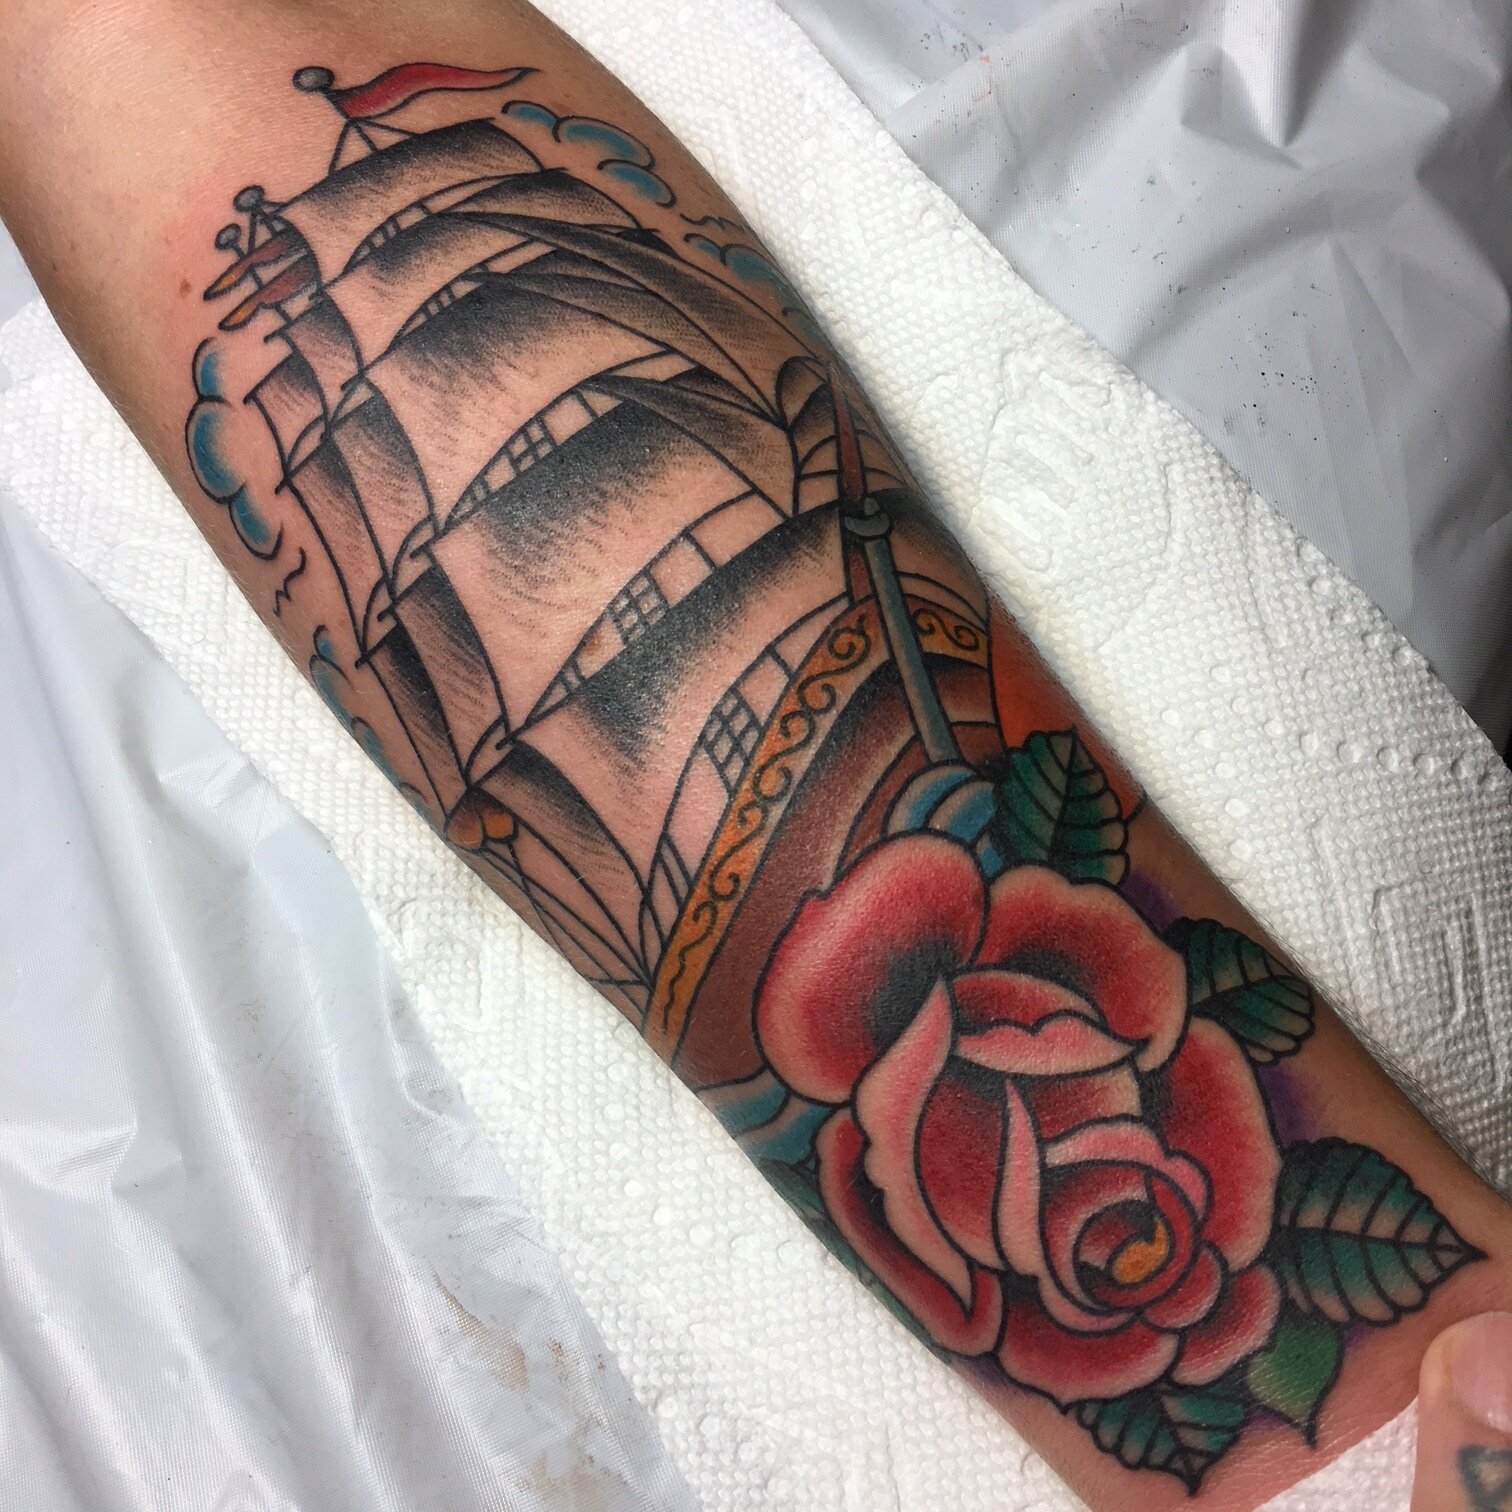 Clipper Ship with rose tattoo in color by Brian Gattis at Southern Star Tattoo in Atlanta, Georgia